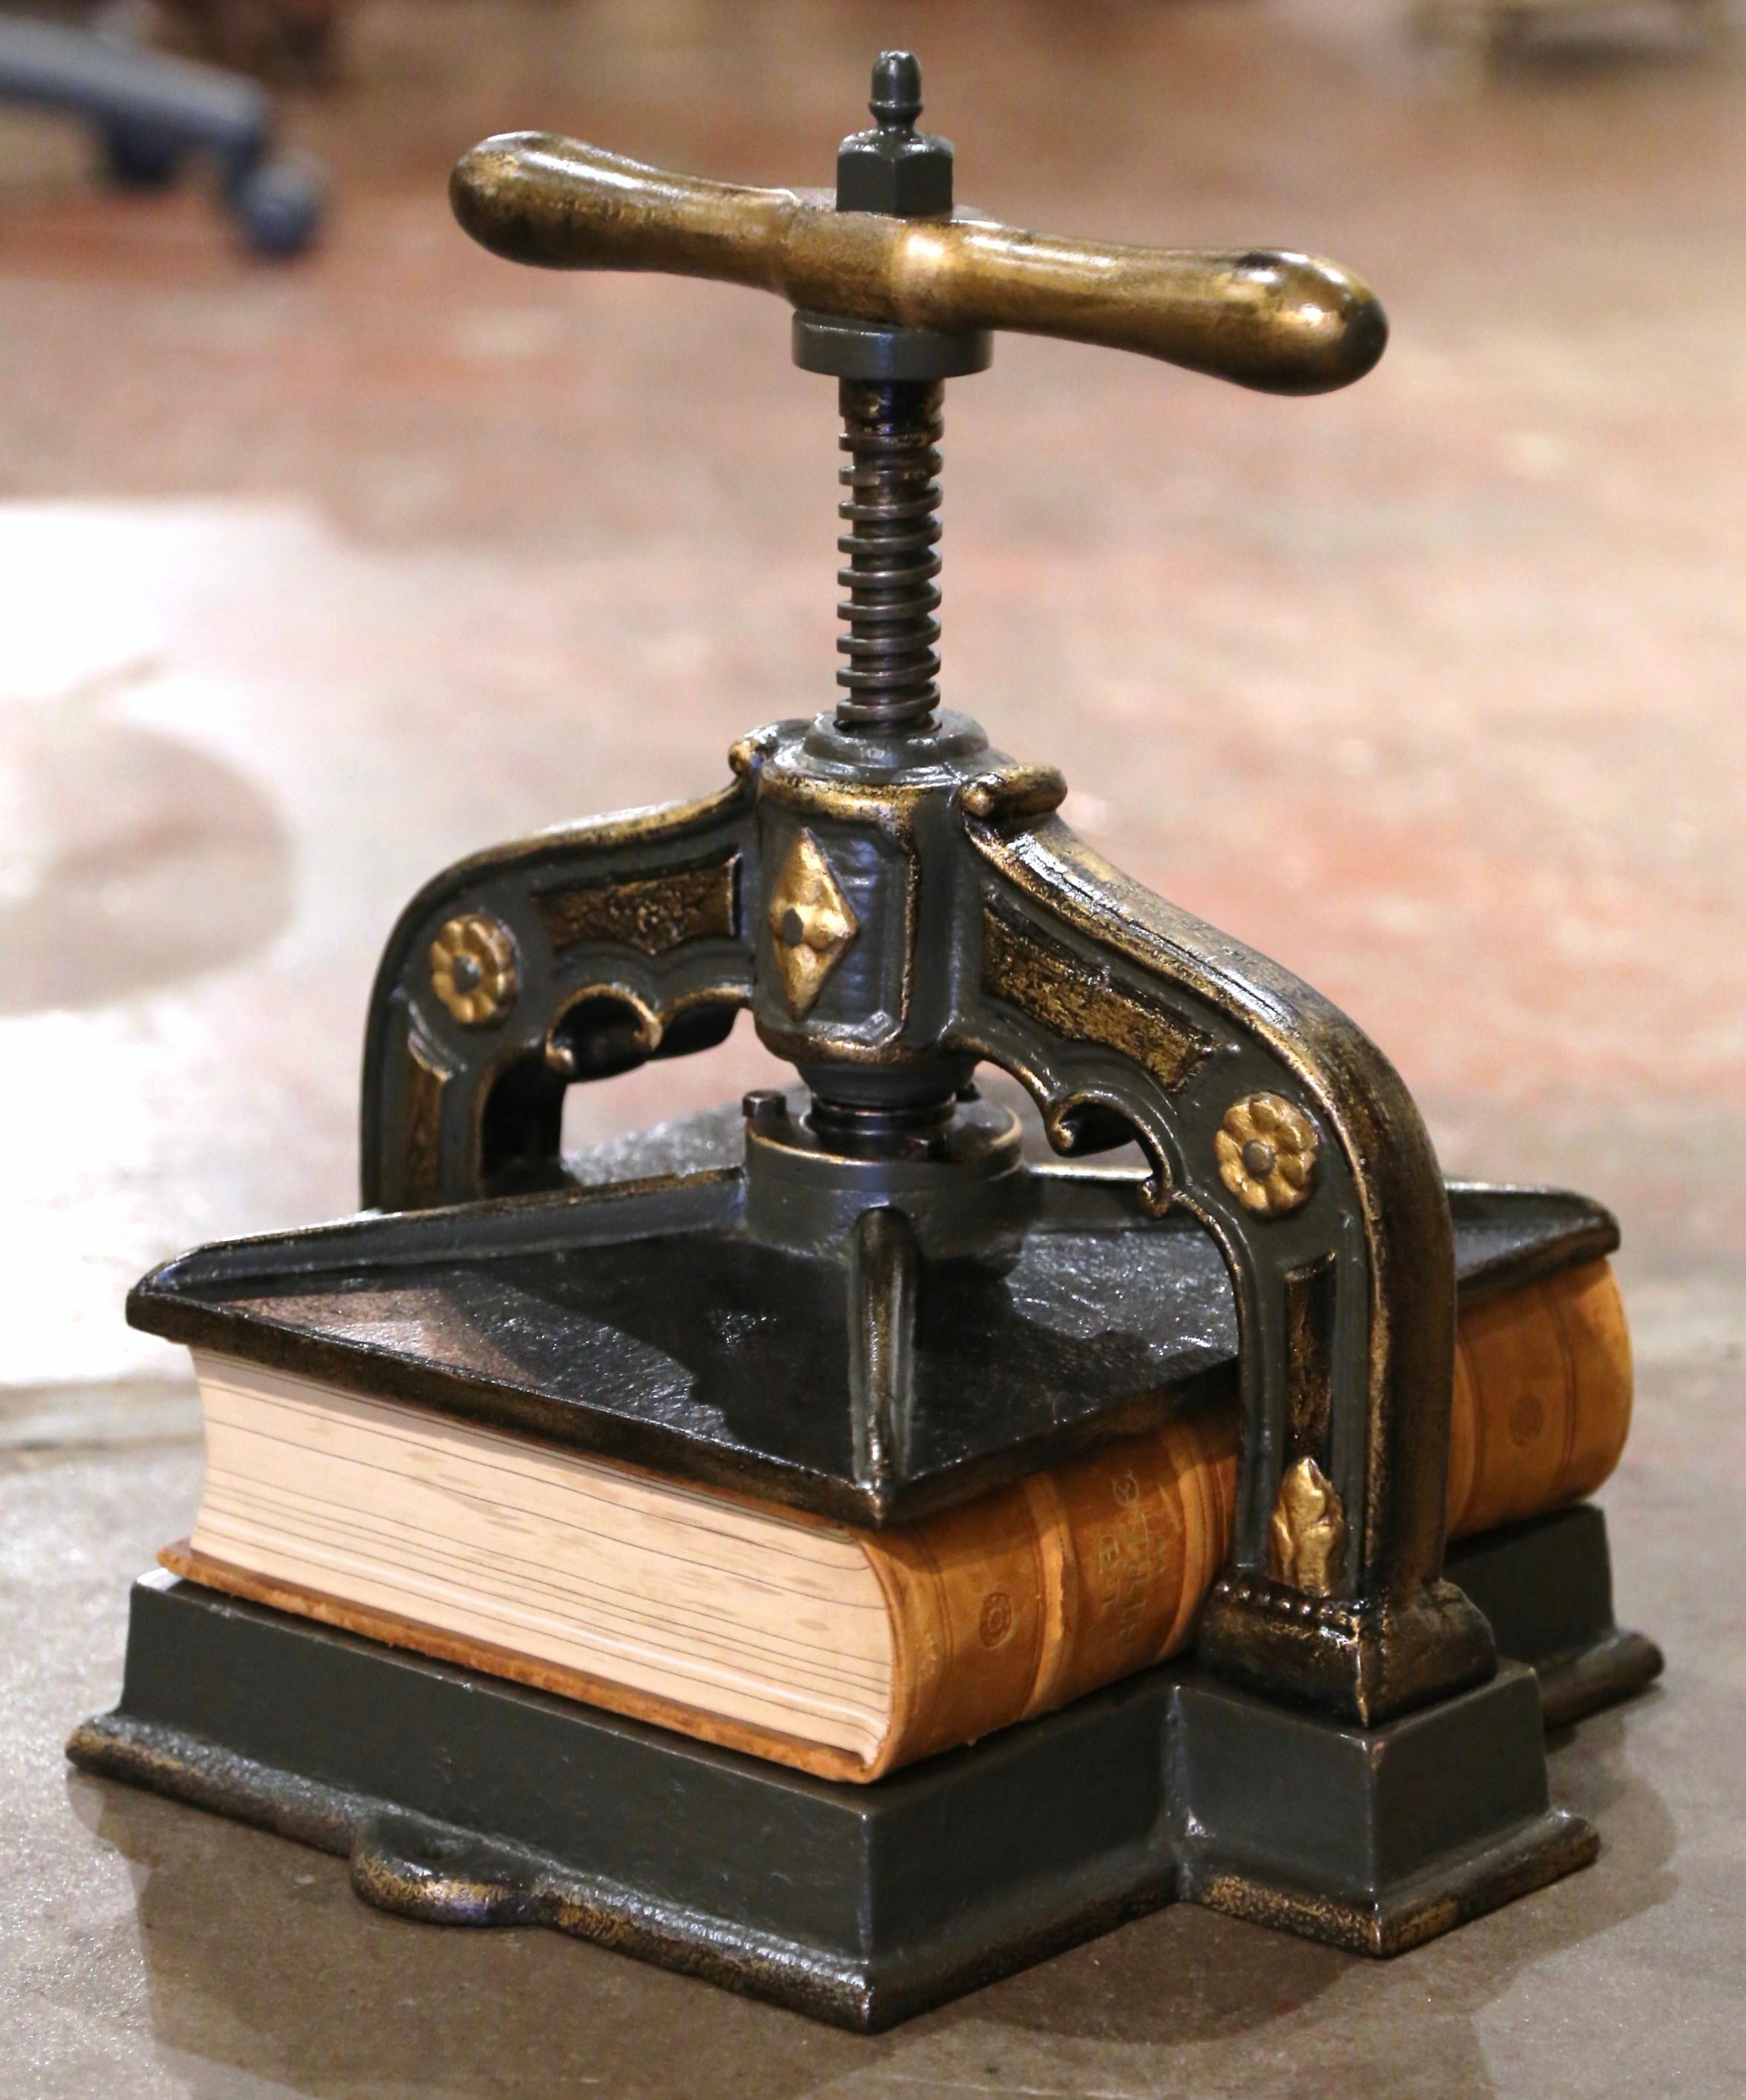 This antique paper binding press was forged in France, circa 1870. The Classic 